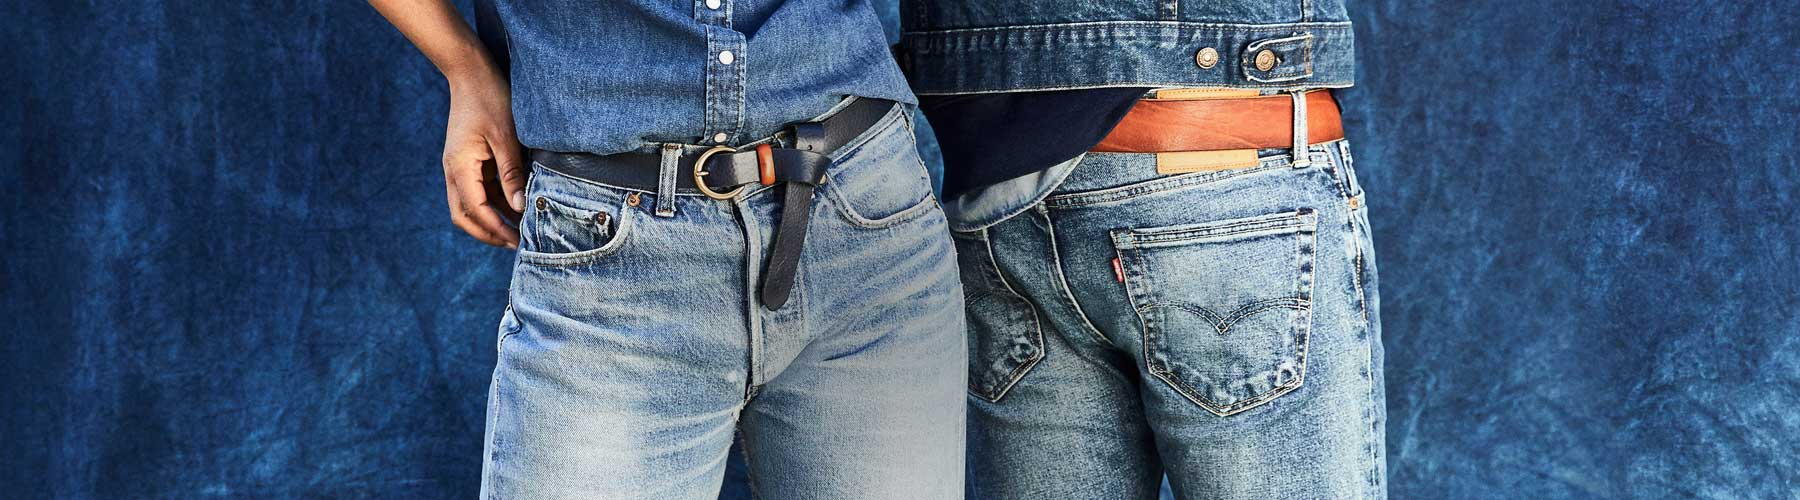 Low Rise Jeans Manufacturers in Delhi